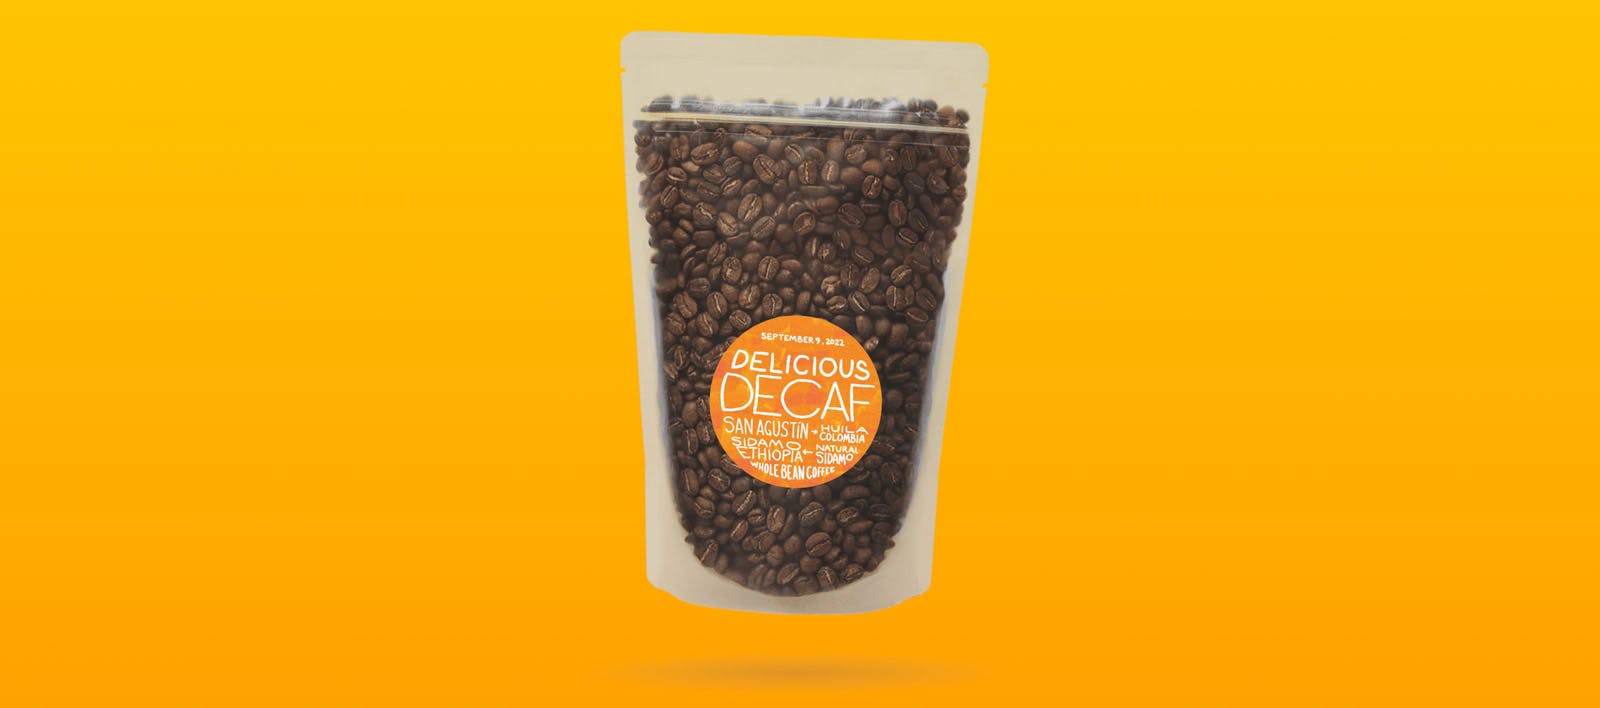 a bag of Yes Plz Coffee's delicious decaf